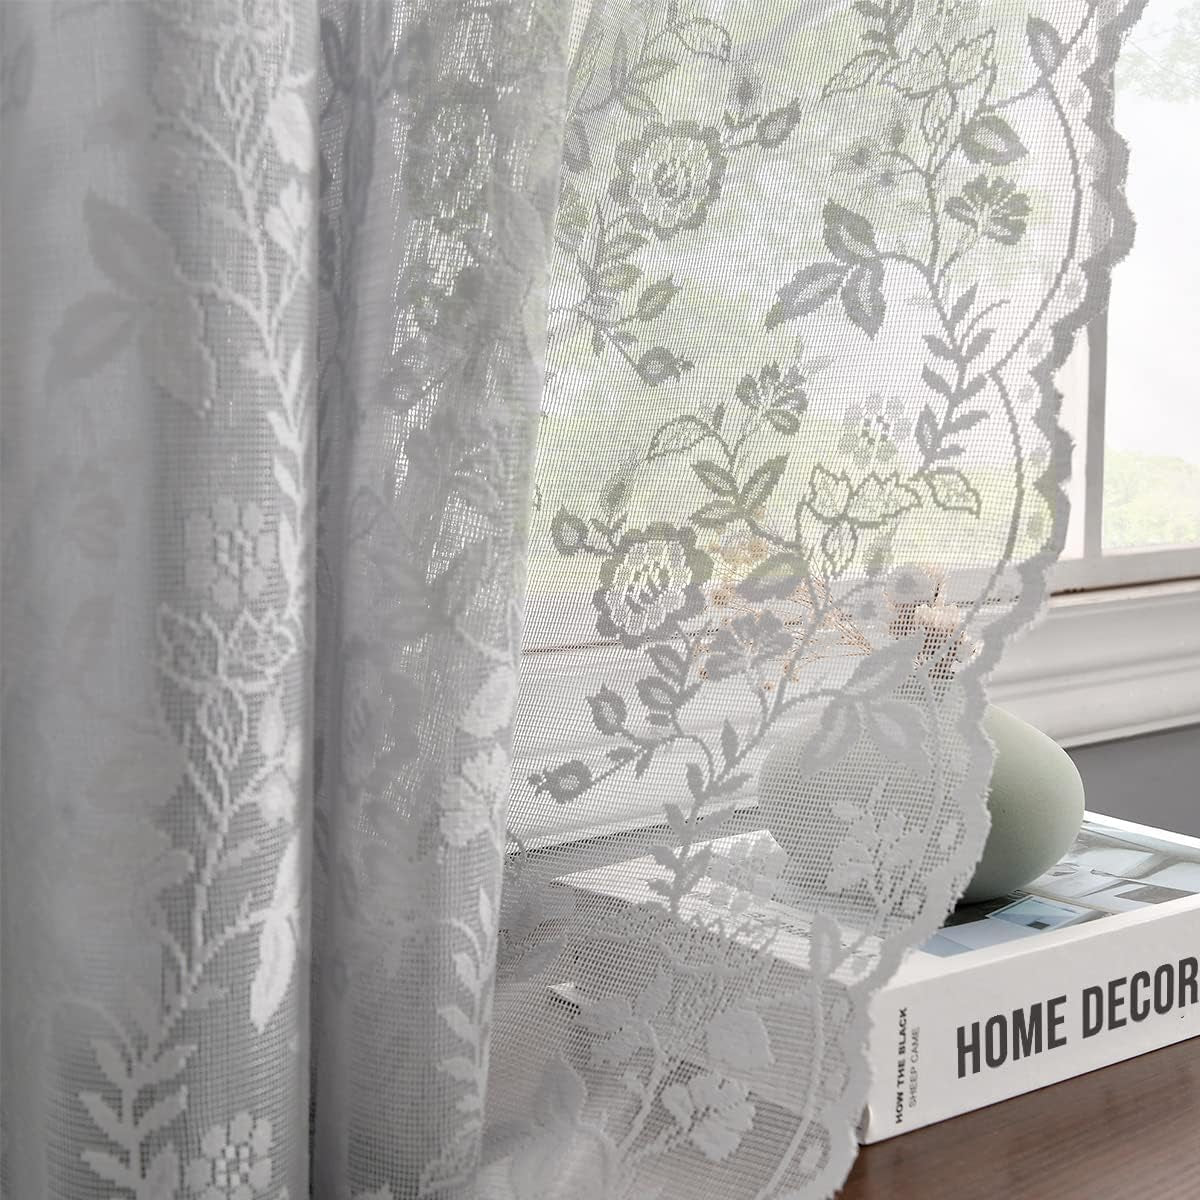 FINECITY Lace Curtains Country Rustic Floral Sheer Curtains for Living Room 72 Inch Length Drapes Vintage Floral Pattern Farmhouse Privacy Light Filtering Sheer Curtain 2 Panels, 52 X 72 Inch, Grey  Keyu Textile Grey W52 X L54 Inch 